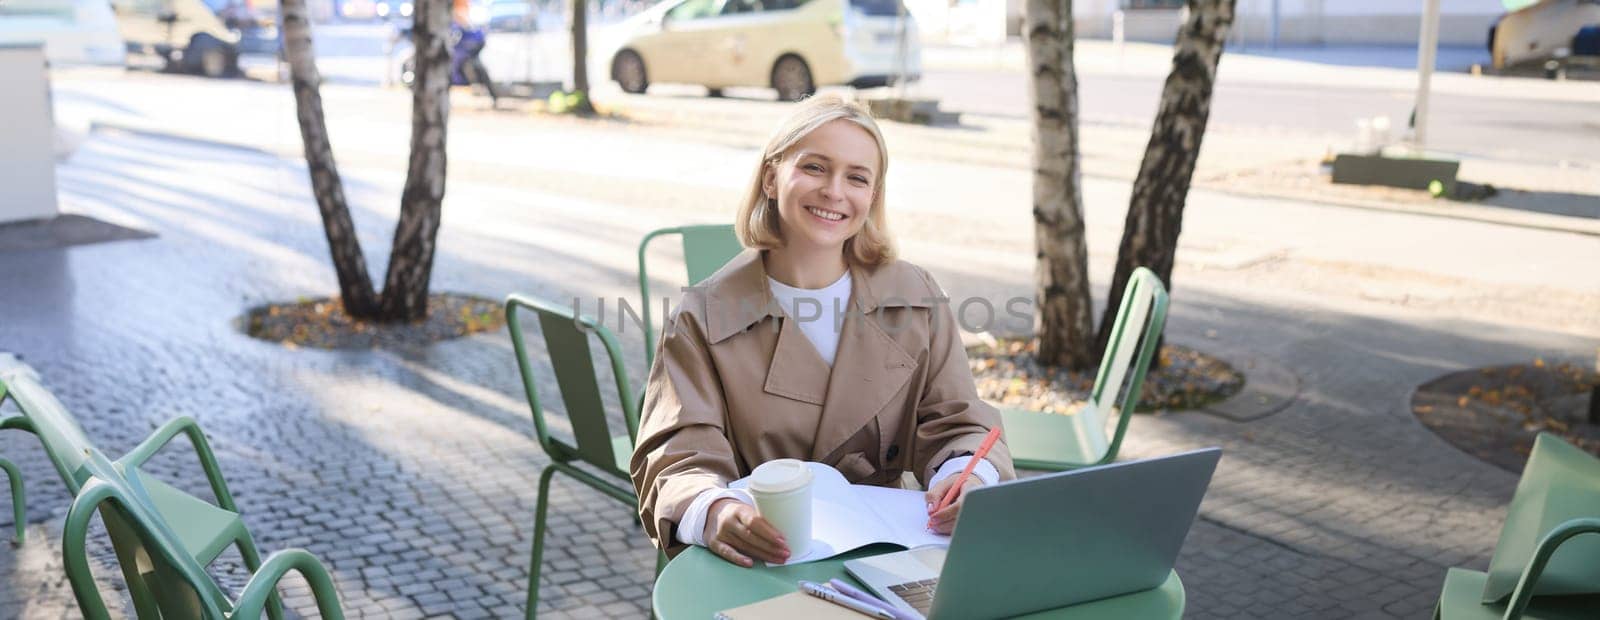 Portrait of young woman working on project, sitting outdoors in cafe, drinking her coffee, using laptop and making notes in notebook, studying, preparing for work interview.